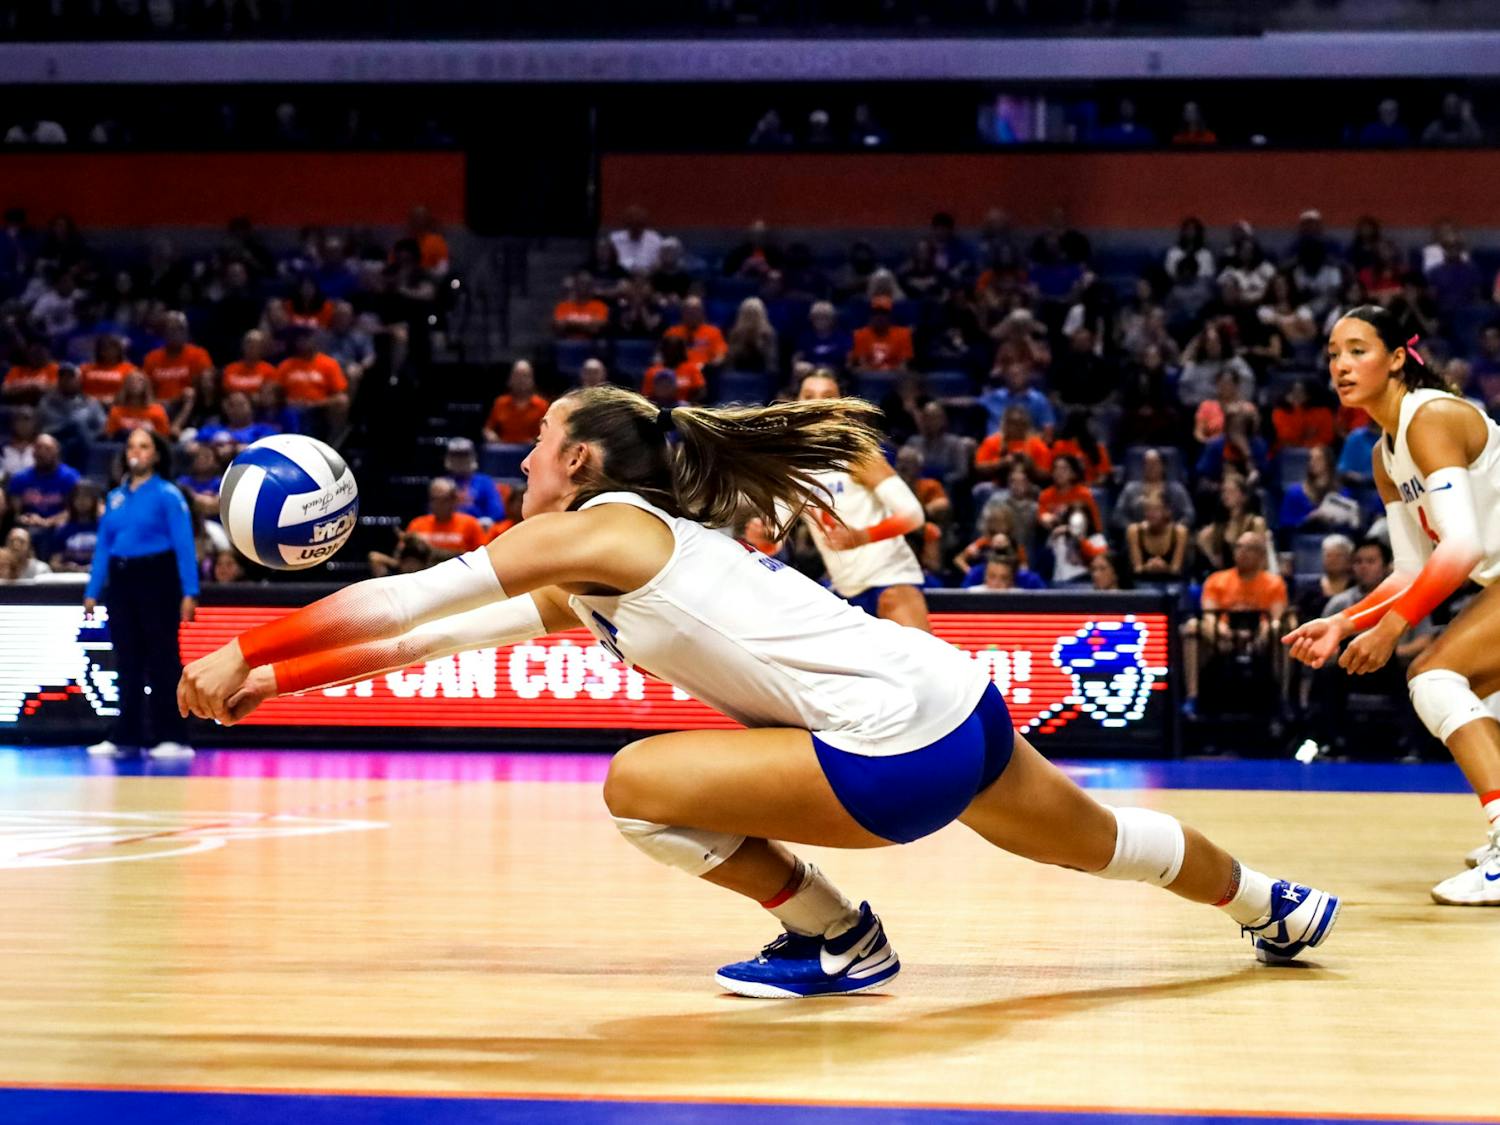 Sophomore libero Emily Canaan dives to set the ball in the Gators' 3-0 win against the LSU Tigers on Friday, Nov. 10, 2023.